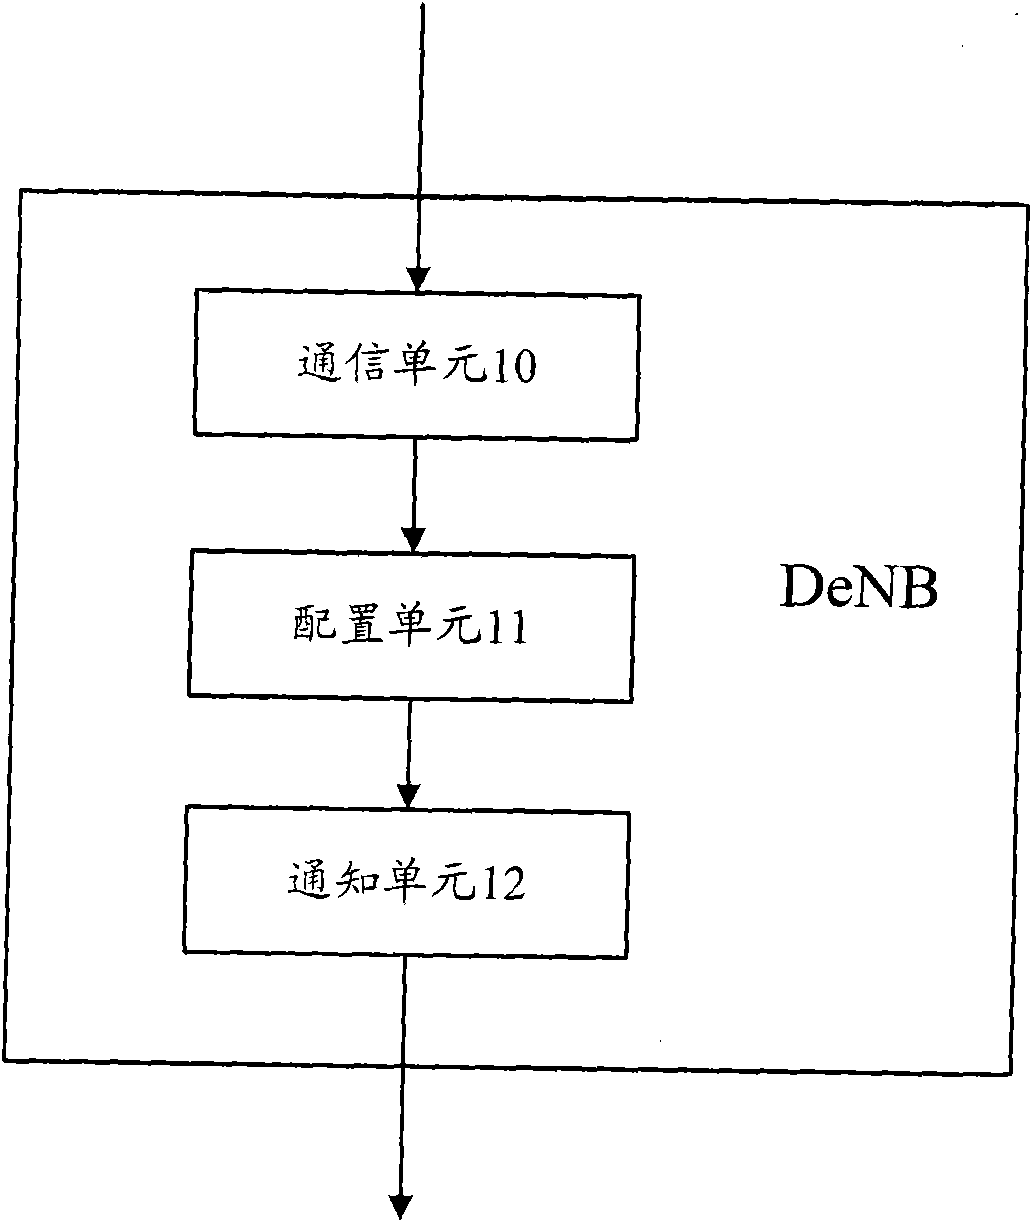 Method, device and system for configuring multicast broadcast single frequency network (MBSFN) sub-frames